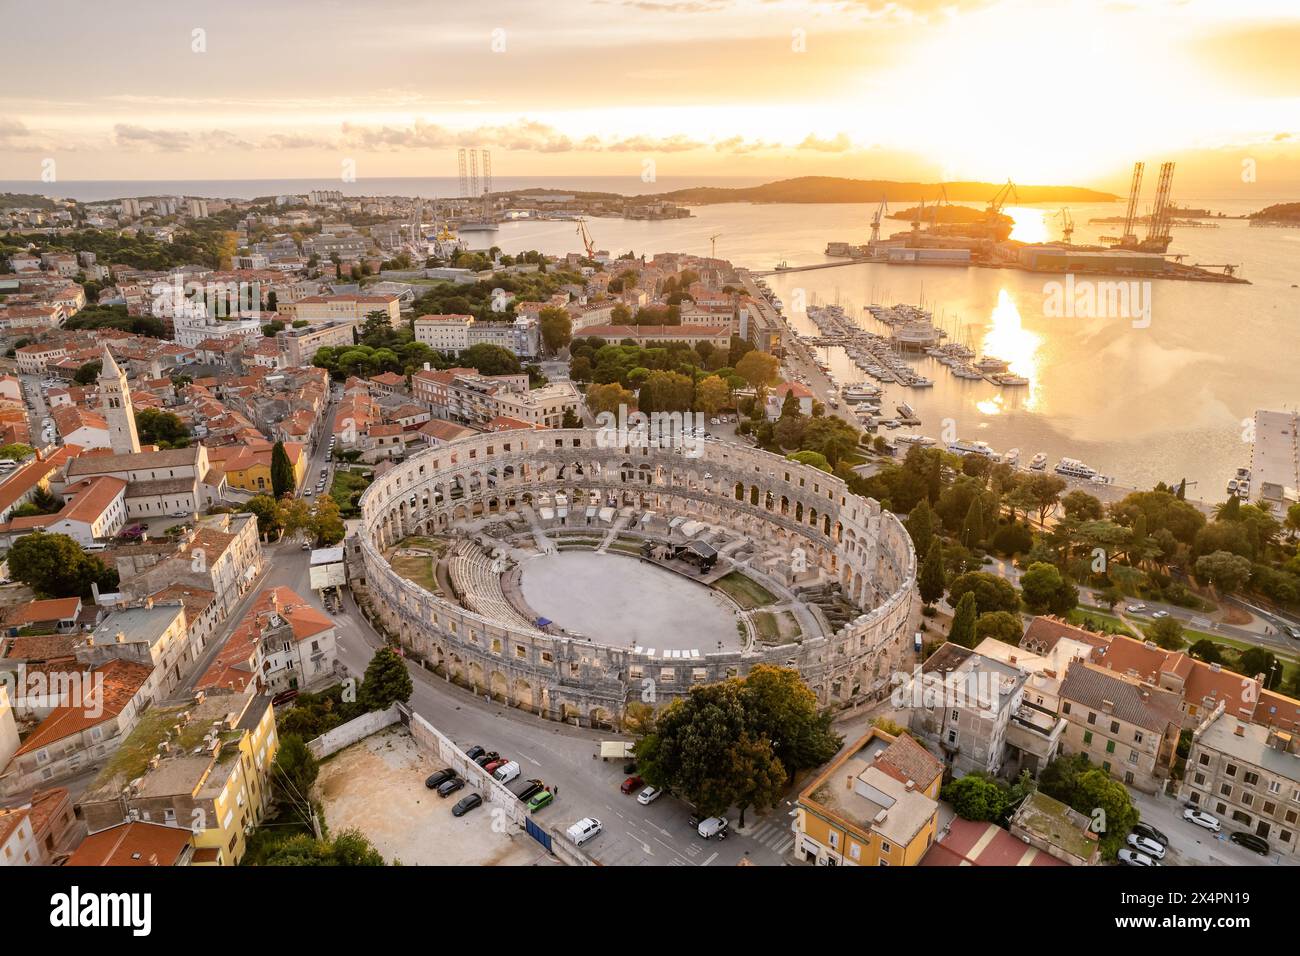 Aerial view of the historic Roman Amphitheatre of Pula at sunset, Croatia Stock Photo